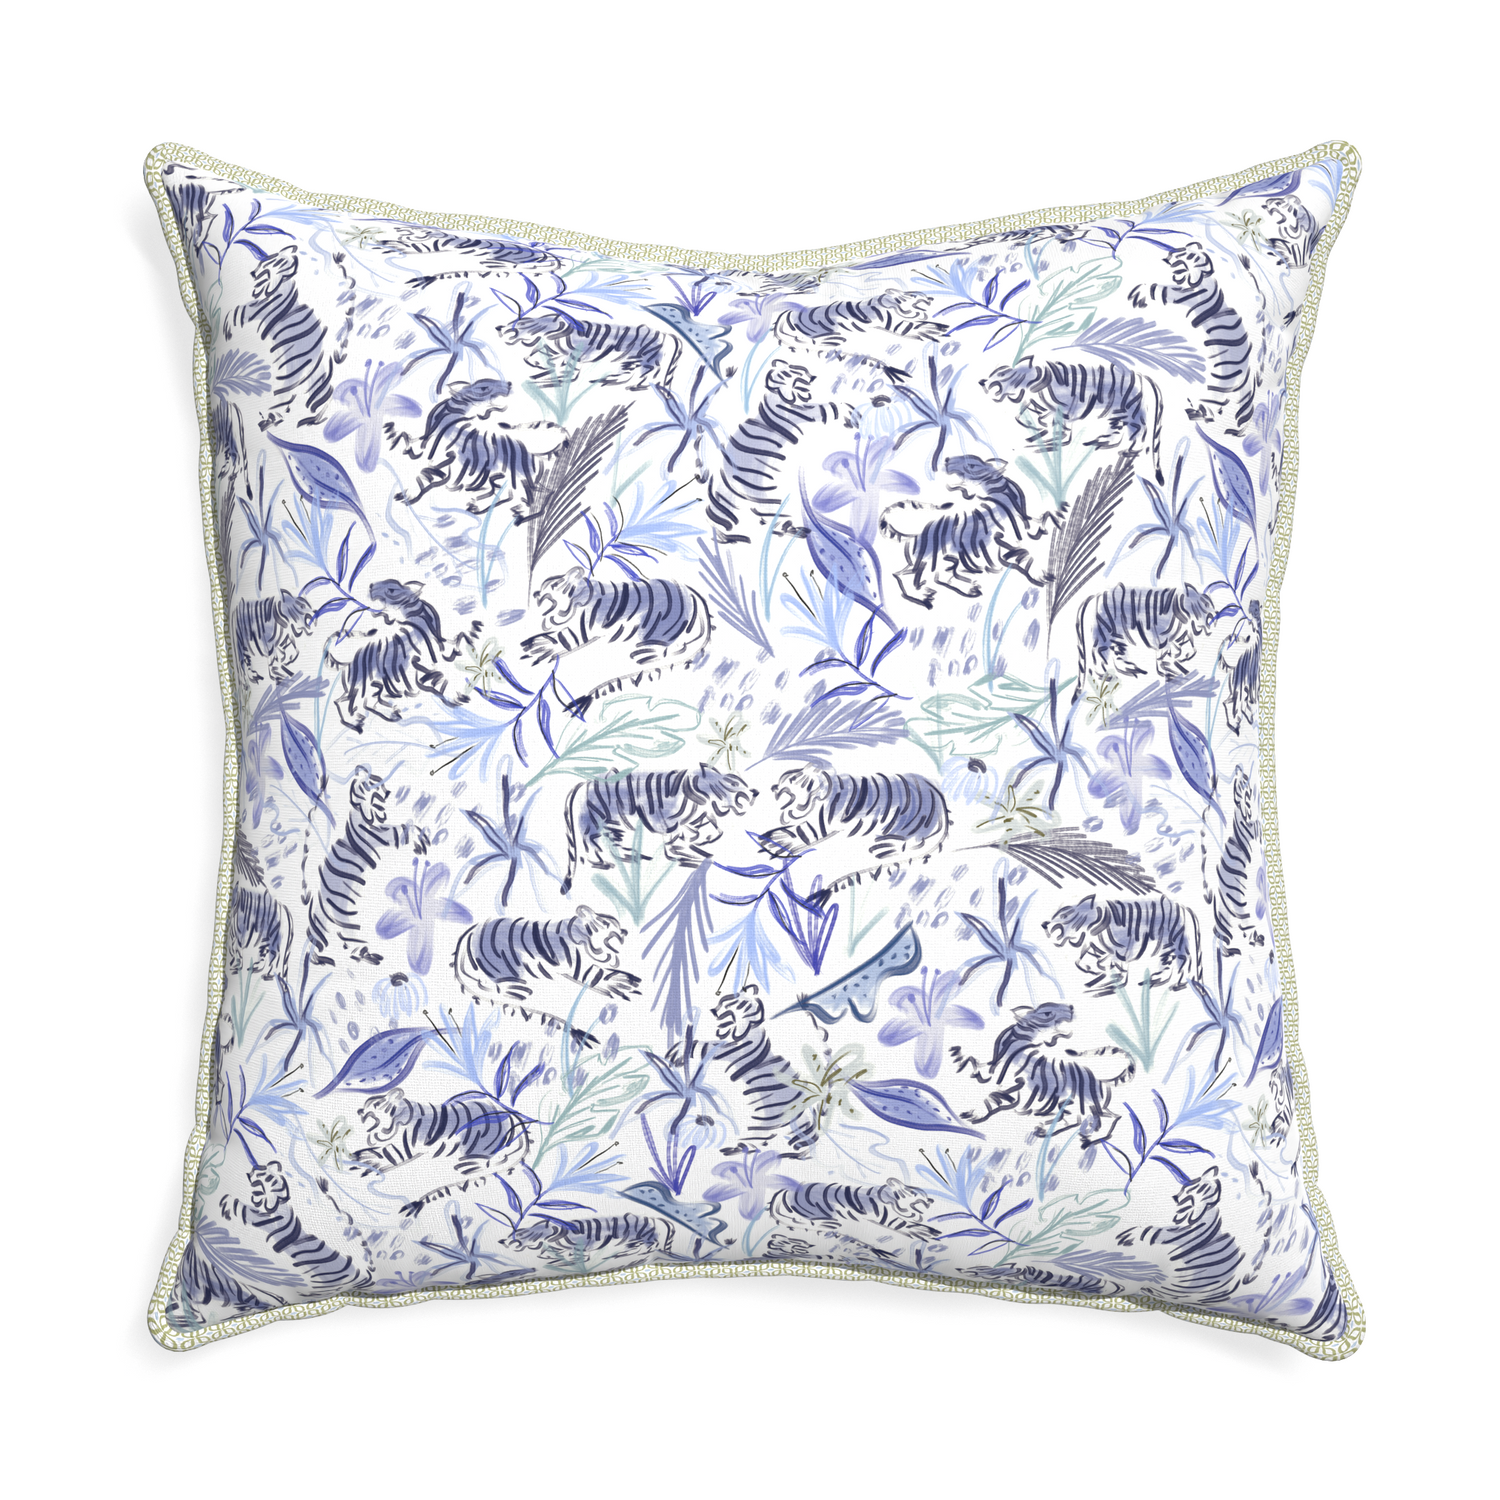 Euro-sham frida blue custom blue with intricate tiger designpillow with l piping on white background